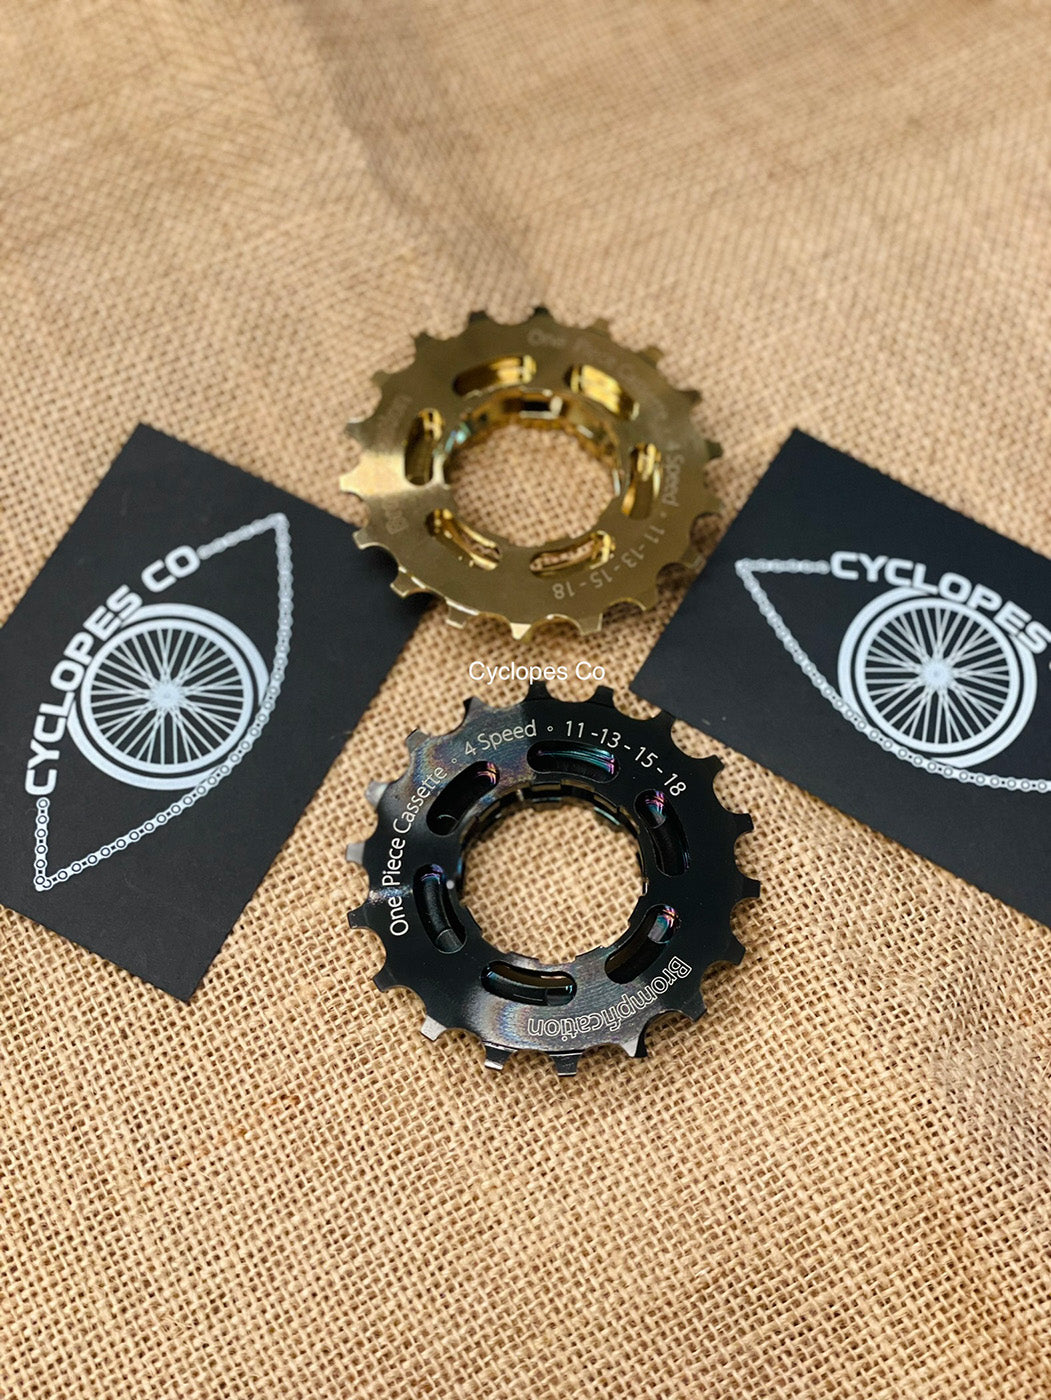 Brompfication 1-Piece Cassette for Brompton P and T-Line